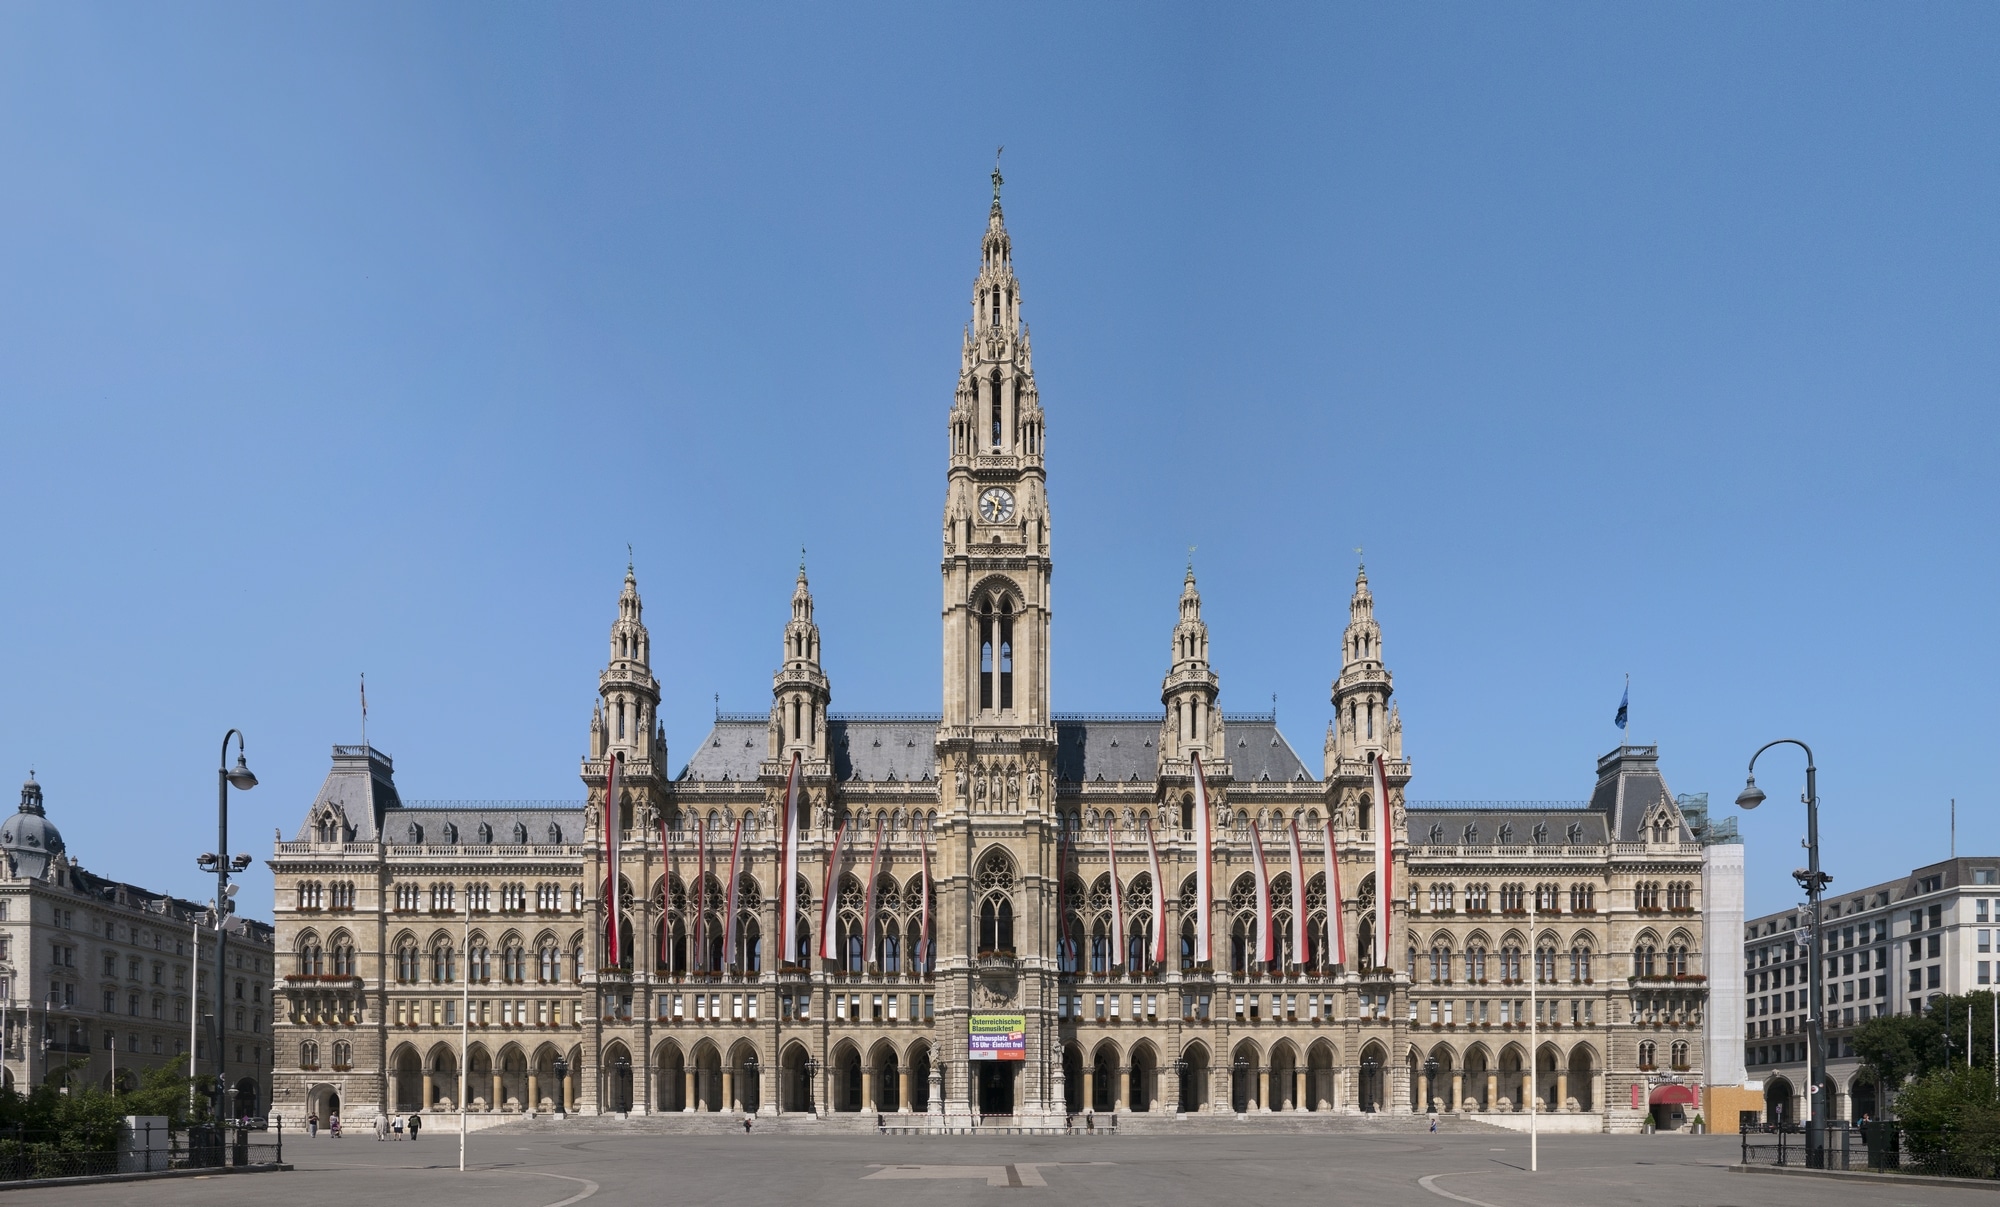 The City Hall in Vienna